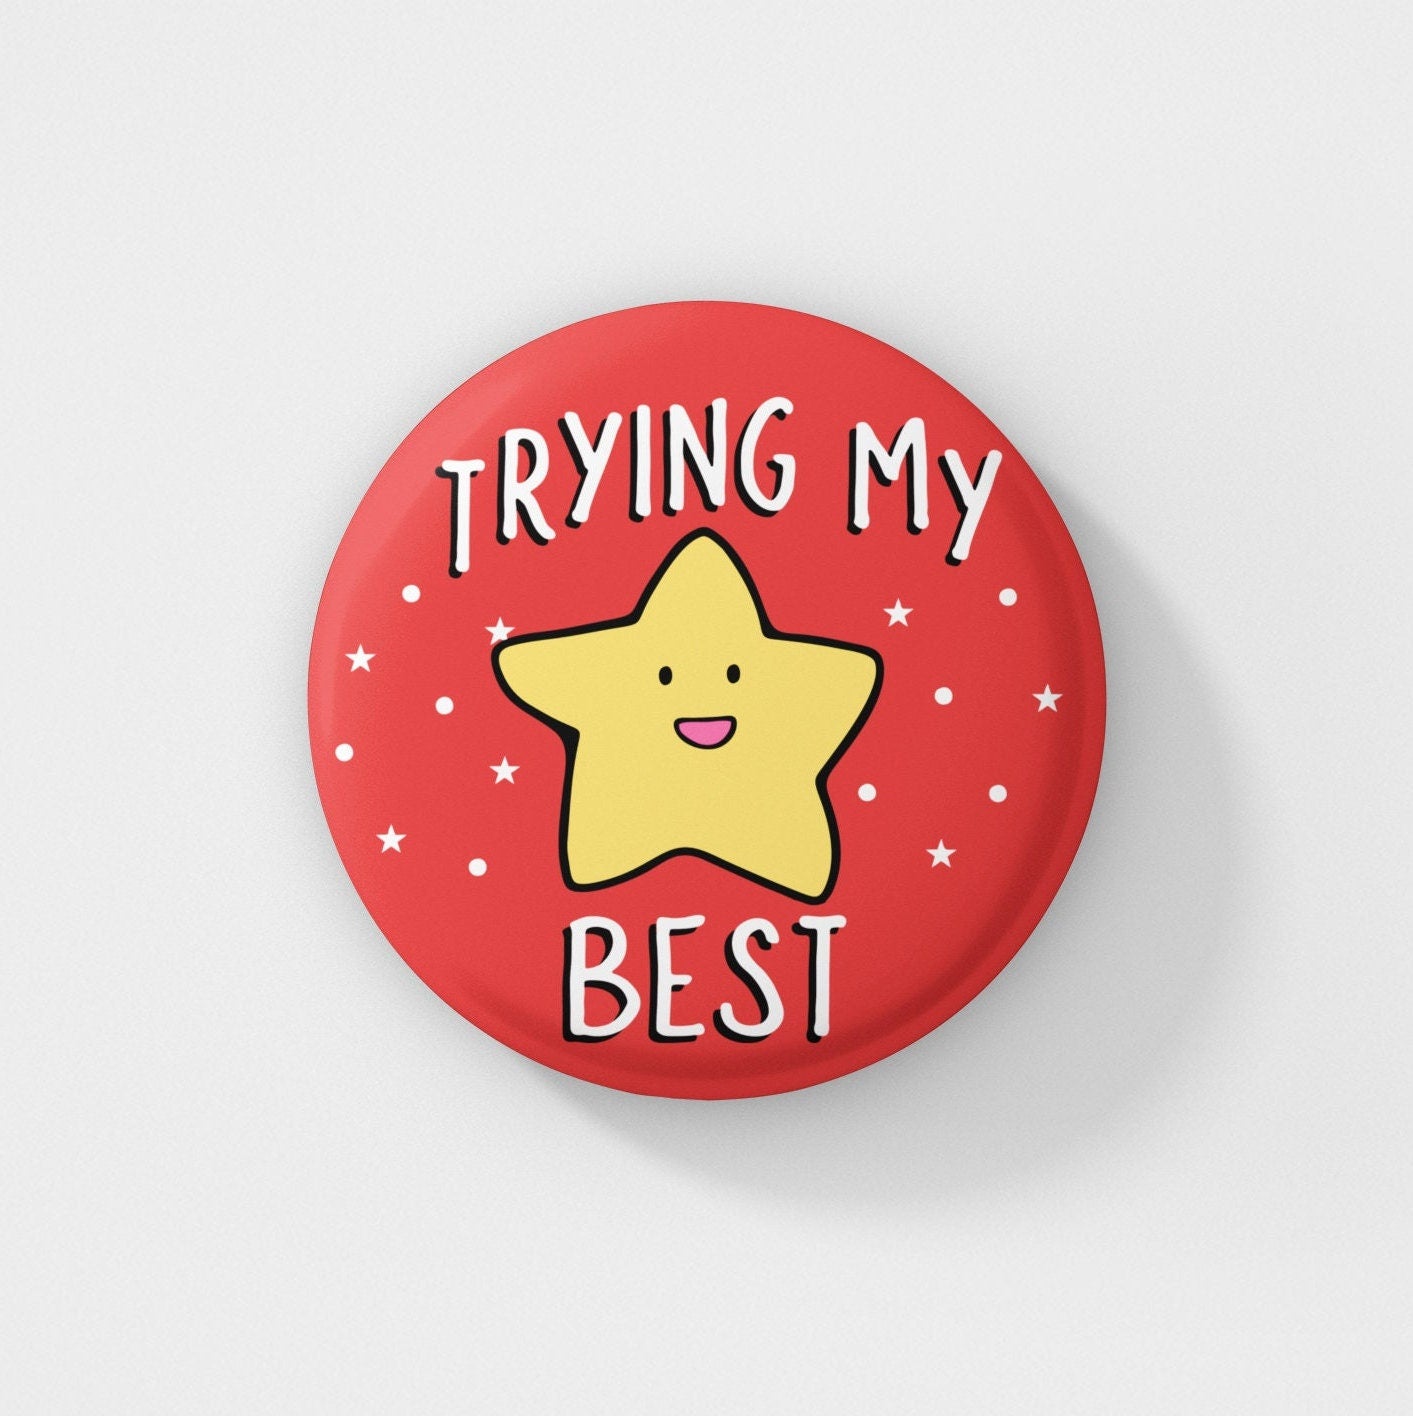 Trying My Best - Pin Badge | Positive Pins, Mental Health Gift, Motivational Gifts